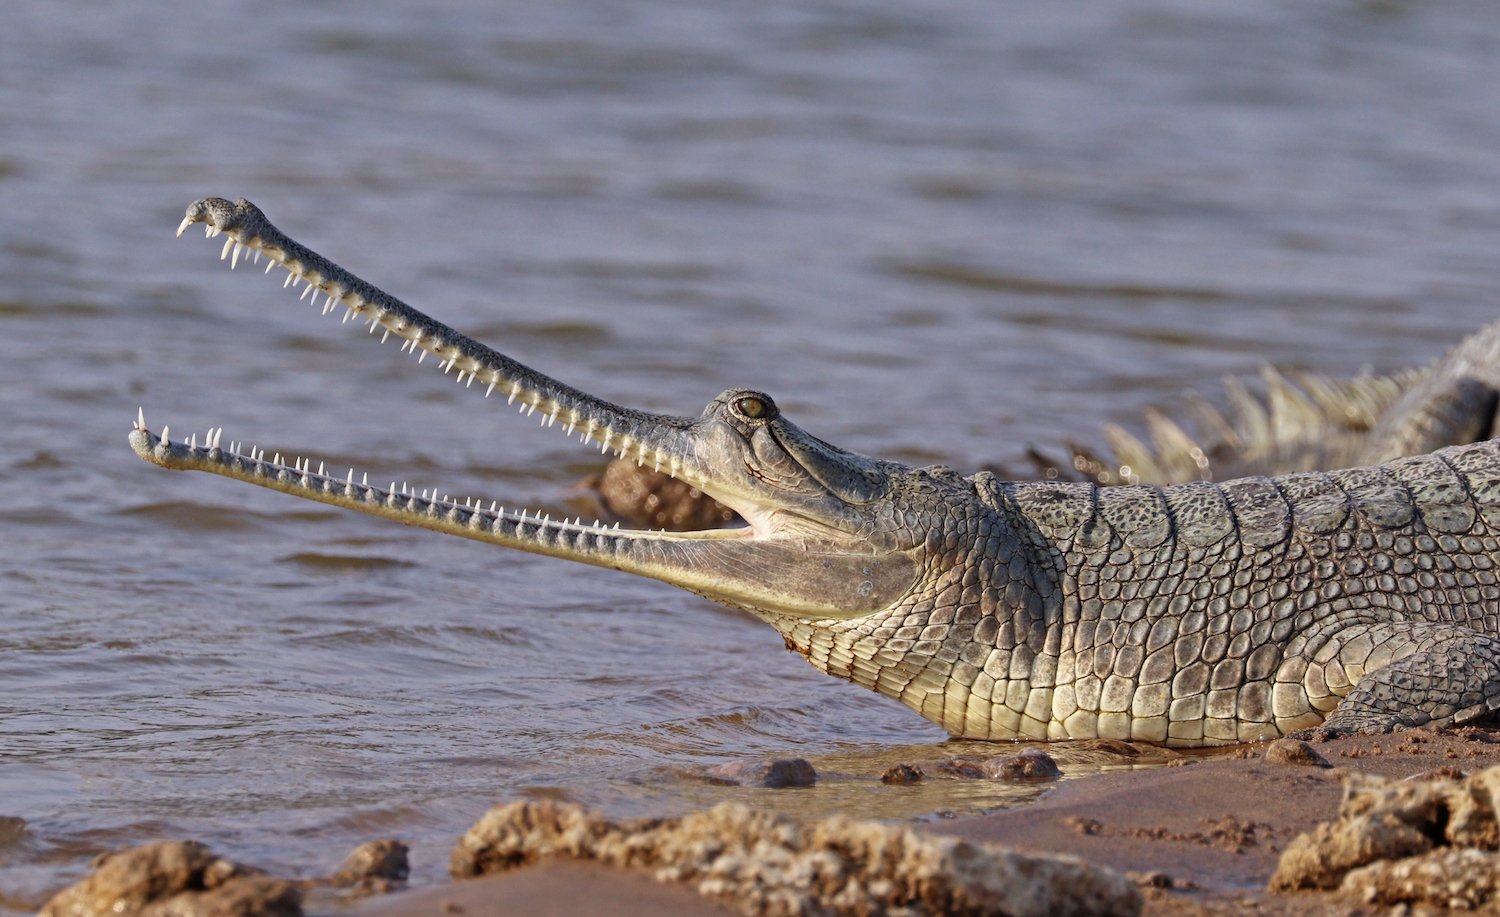 A gharial on the Chambal river (Image Source: Charles J Sharp, From Sharp Photography via Wikimedia Commons)